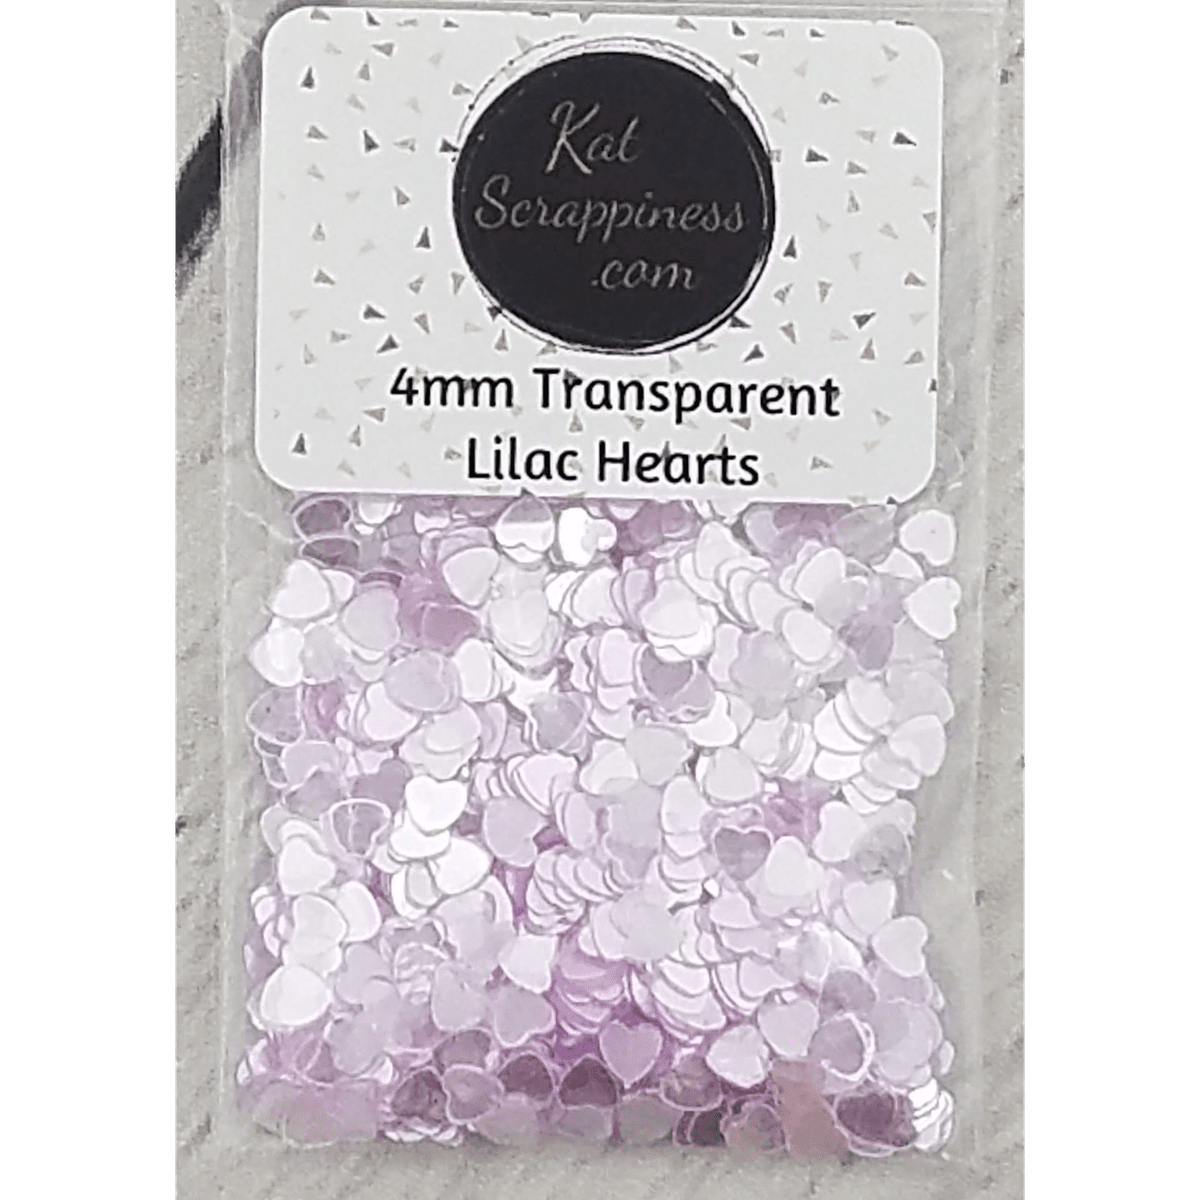 4mm Transparent Lilac Solid Heart Confetti - Sequins - Kat Scrappiness